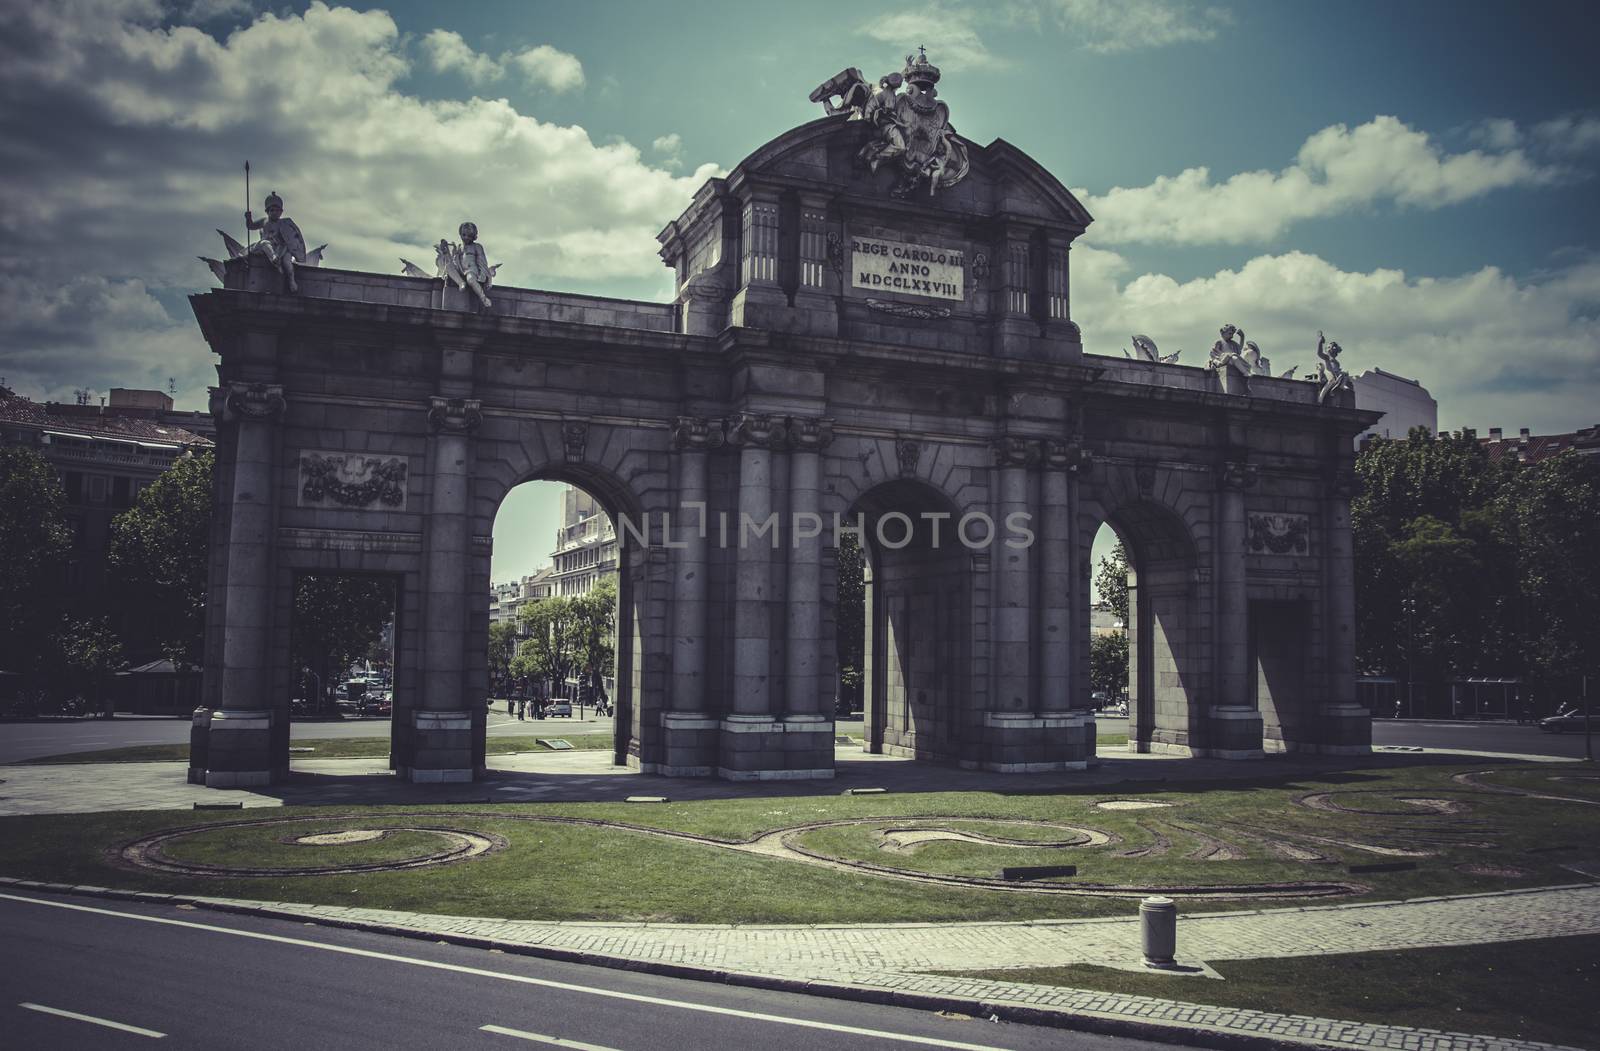 Puerta de Alcal��, Image of the city of Madrid, its characteristic architecture